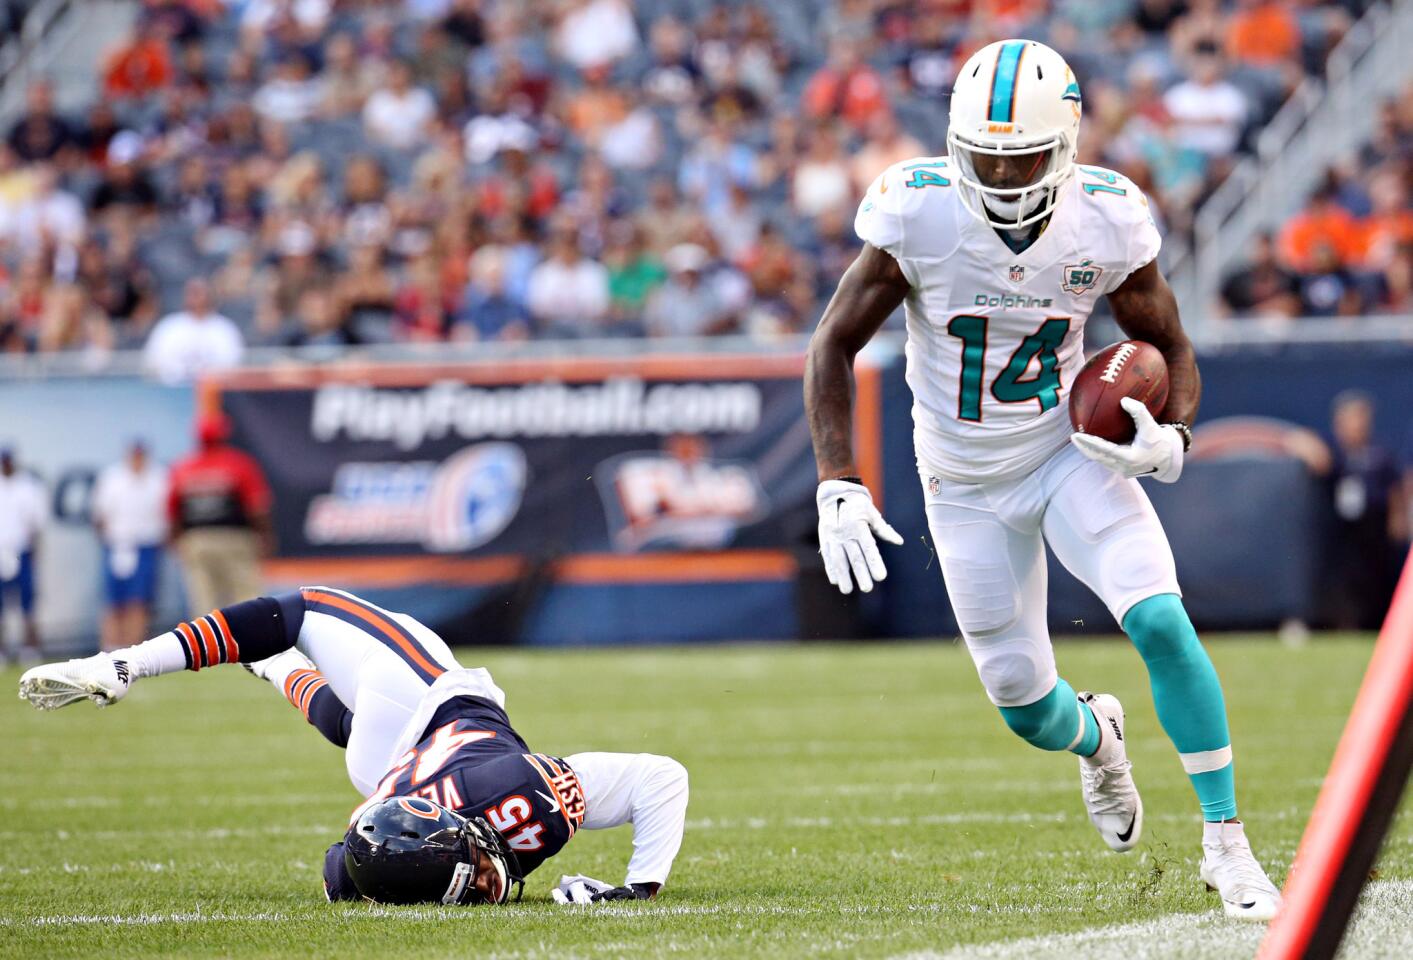 Exhibition opener: Bears 27, Dolphins 10